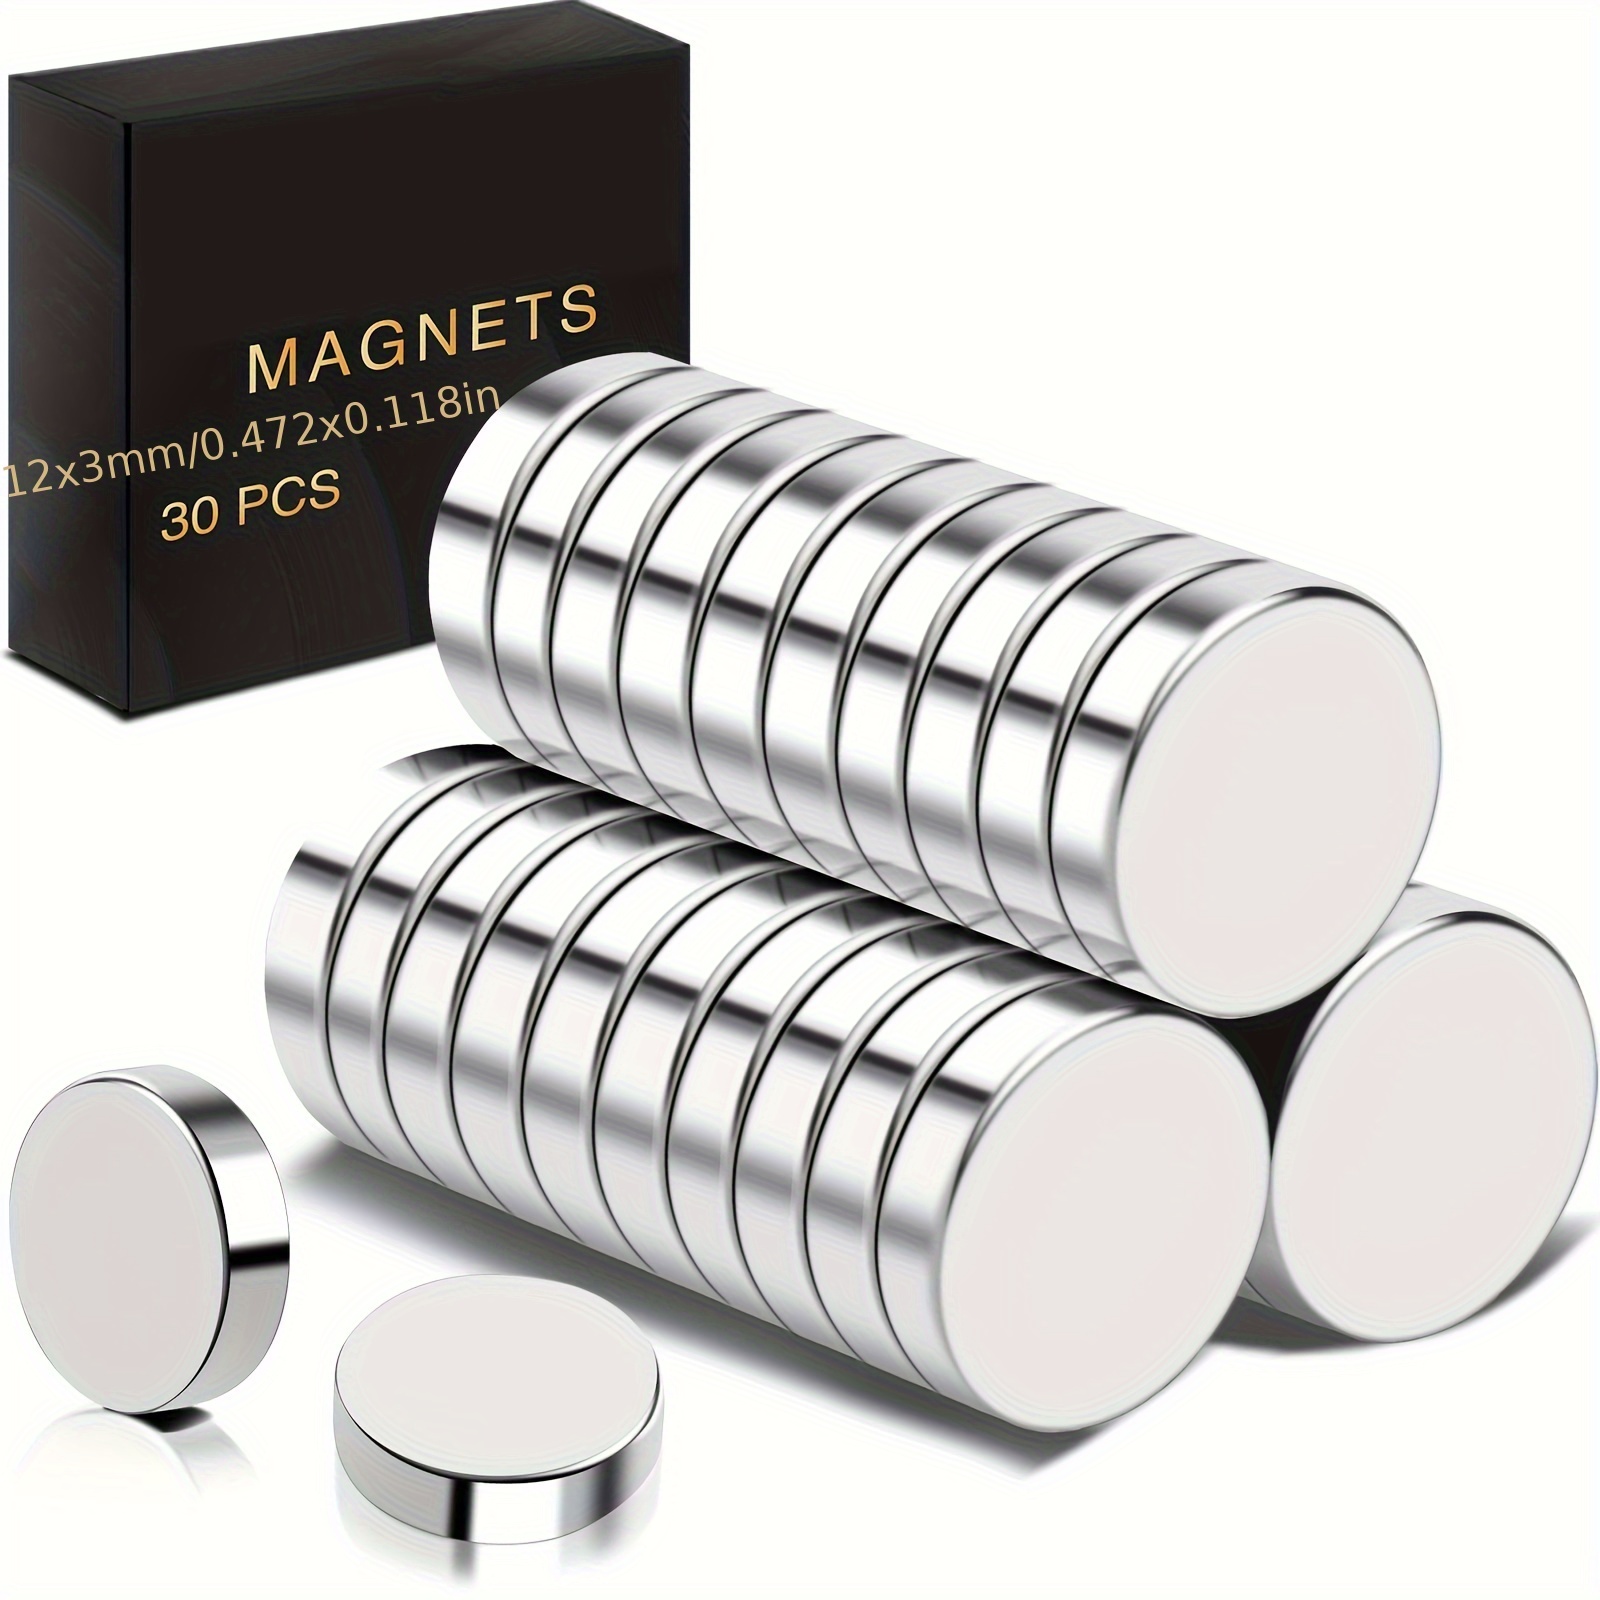 80 PCS Small Magnets 5x3mm, Neodymium Magnet Round, Strong Magnets, Fridge  Magnets Adult for Whiteboard, Fridge, Home, Kitchen, Office